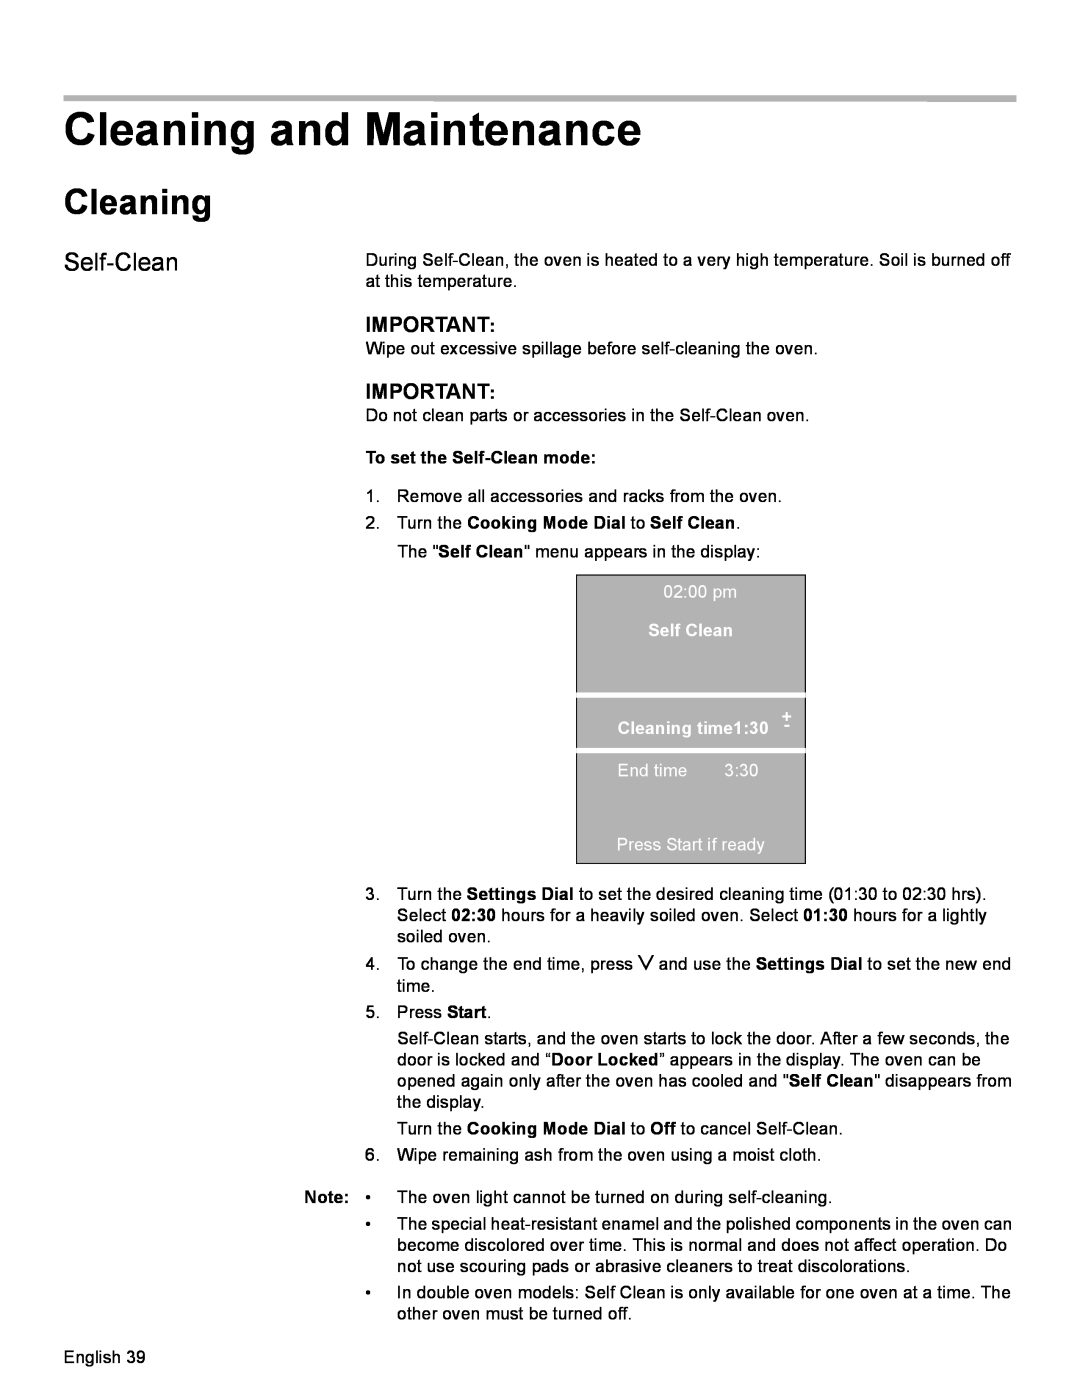 Bosch Appliances HBL54, HBL57, HBL56, HBN56, HBN54 manual Cleaning and Maintenance, To set the Self-Cleanmode 